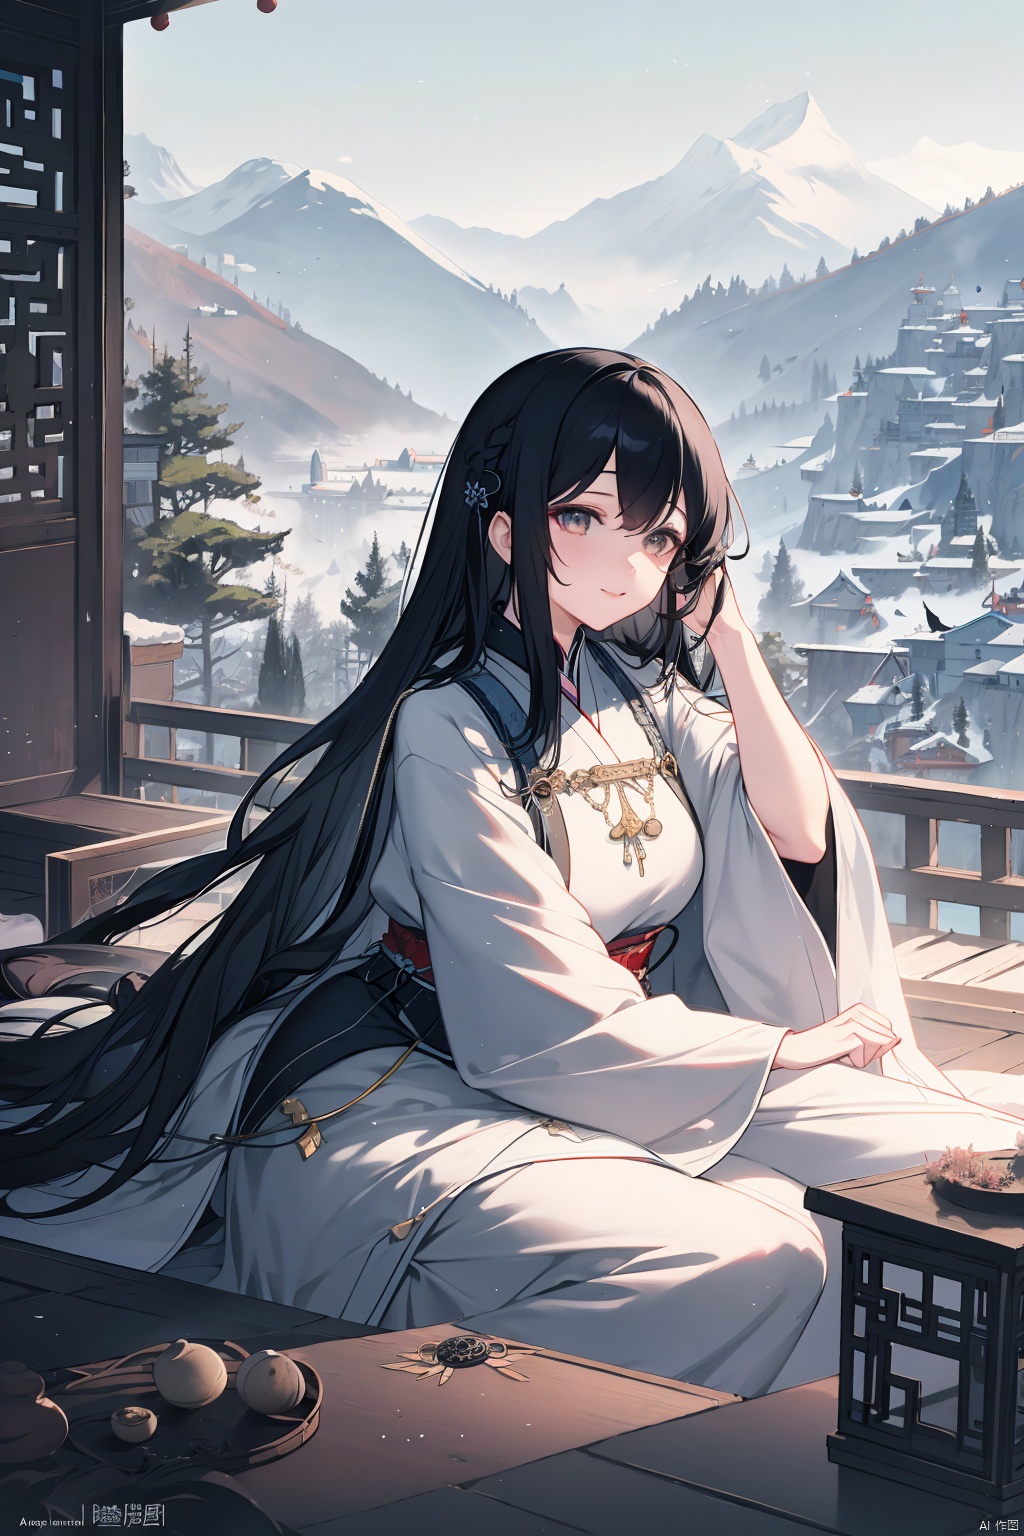 A young girl with long black hair, big eyes, a plump figure, a smile on her face, dressed in white armor, sits quietly gazing at the audience. The spring climate is set against mountains and rivers, with ink style mountains, trees, flowing water, girls, and birds as its characteristics. This is a futuristic environment with a strong talent for fantasy. This photo has a deep perspective, the best proportion, close ups, 8K HD, and high-resolution, AI Traditional Ink Painting